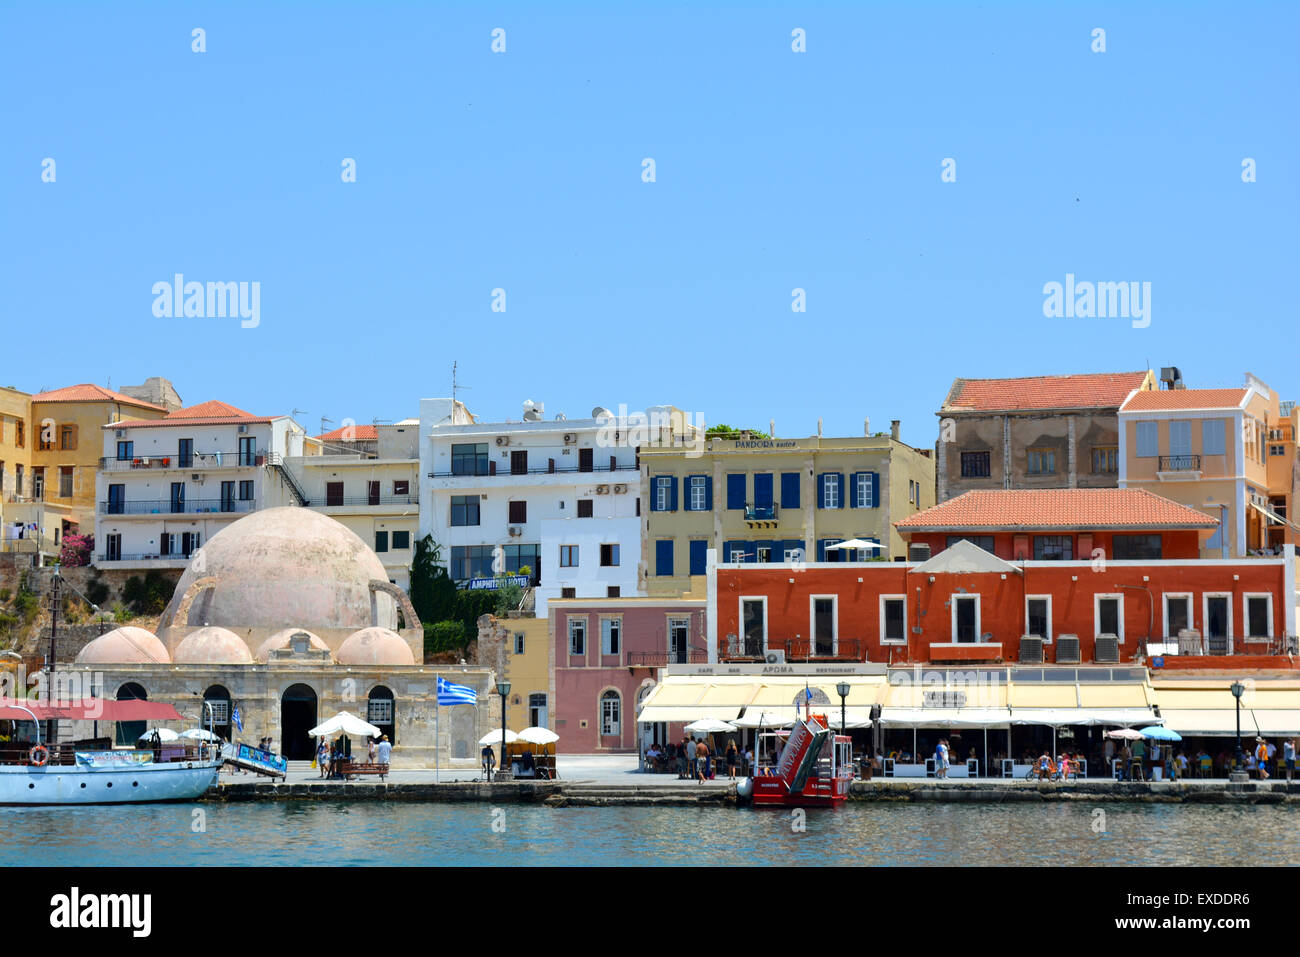 Pastel-colored houses on the seafront in the harbor of Chania, Crete, Greece Stock Photo